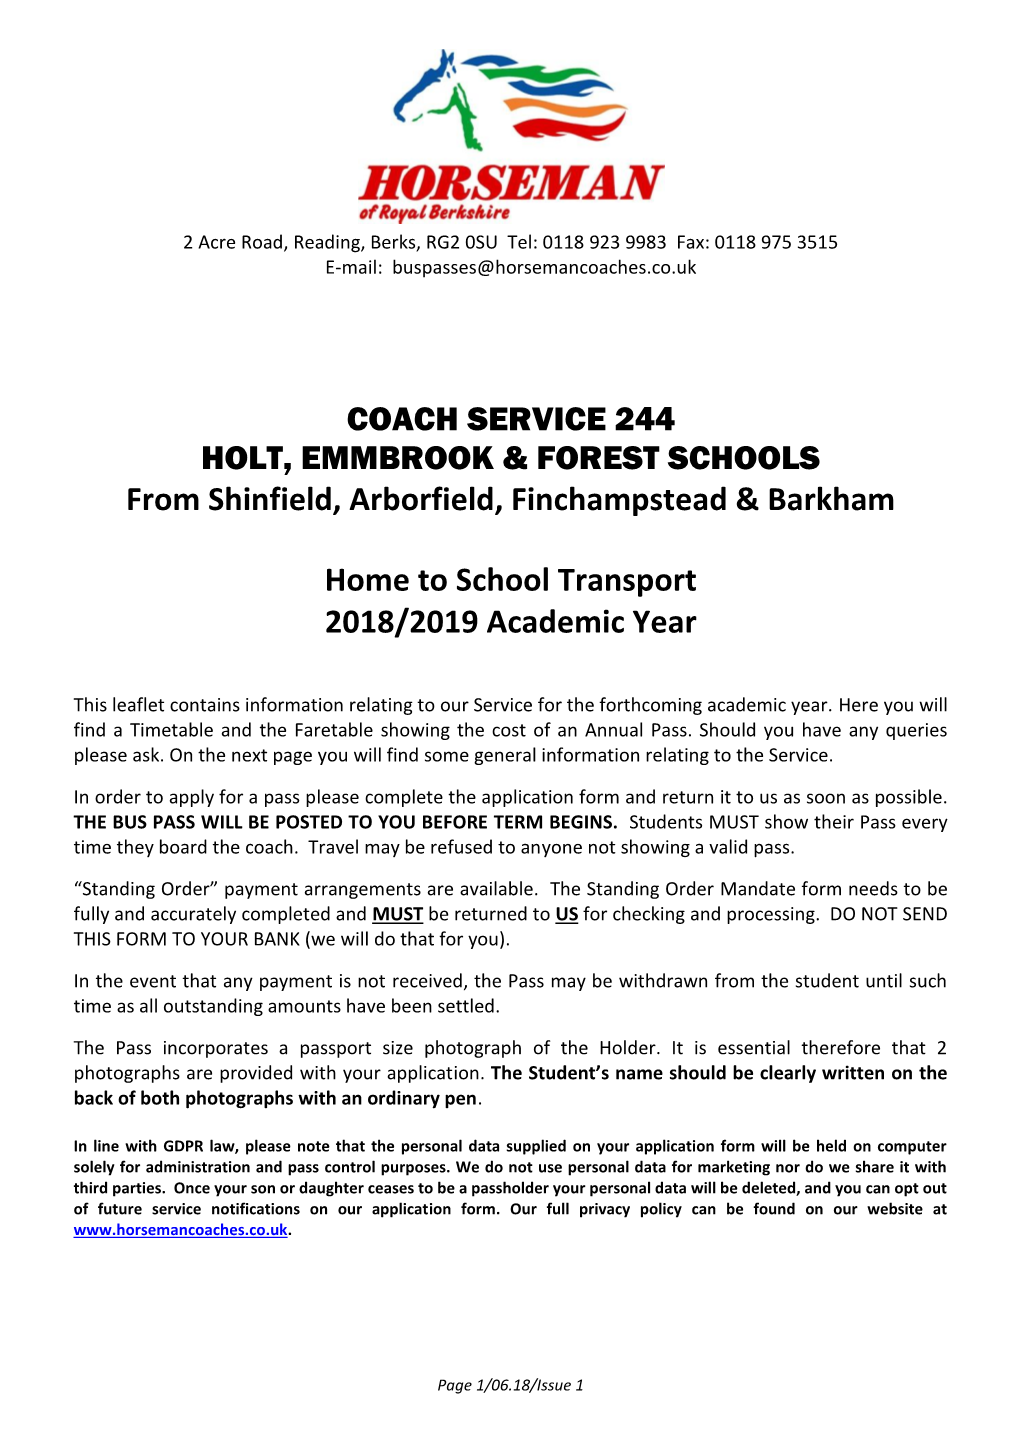 COACH SERVICE 244 HOLT, EMMBROOK & FOREST SCHOOLS from Shinfield, Arborfield, Finchampstead & Barkham